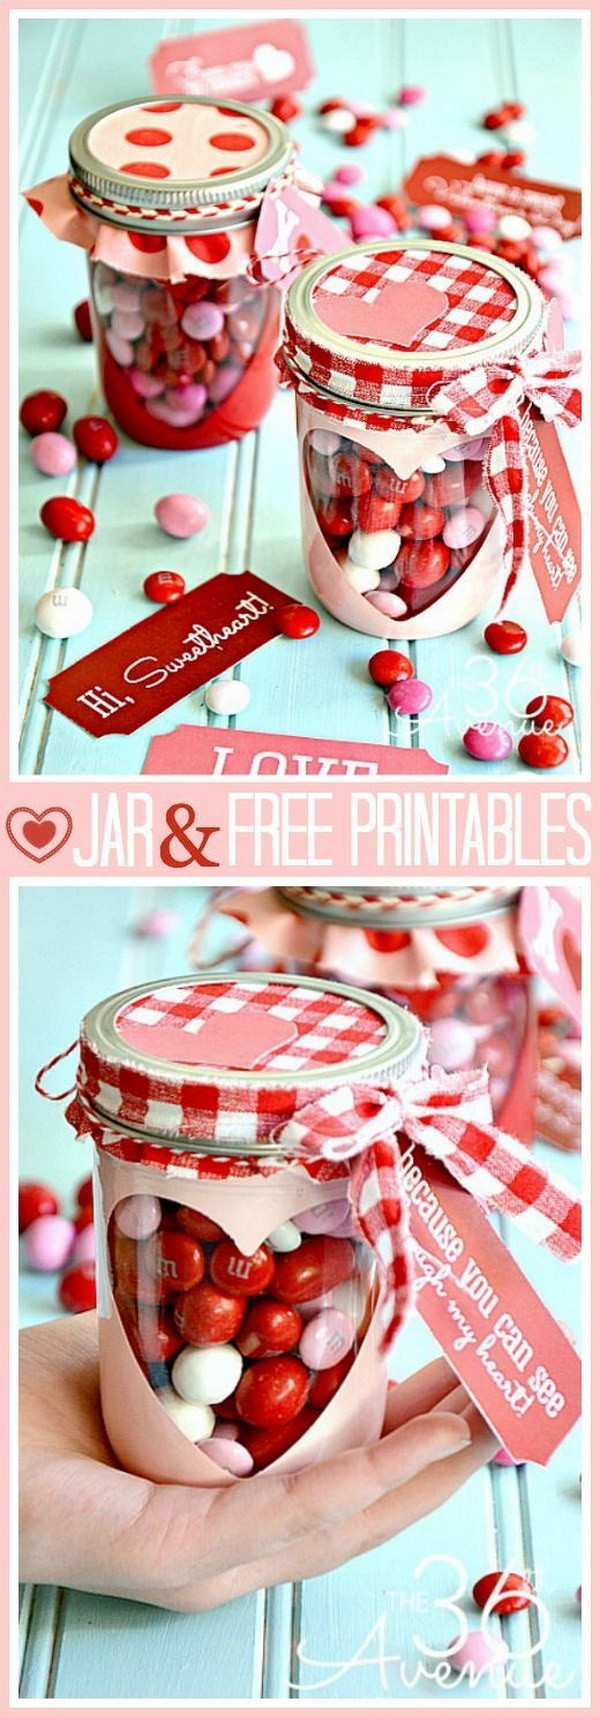 Valentines Day Candy Gift
 70 DIY Valentine s Day Gifts & Decorations Made From Mason